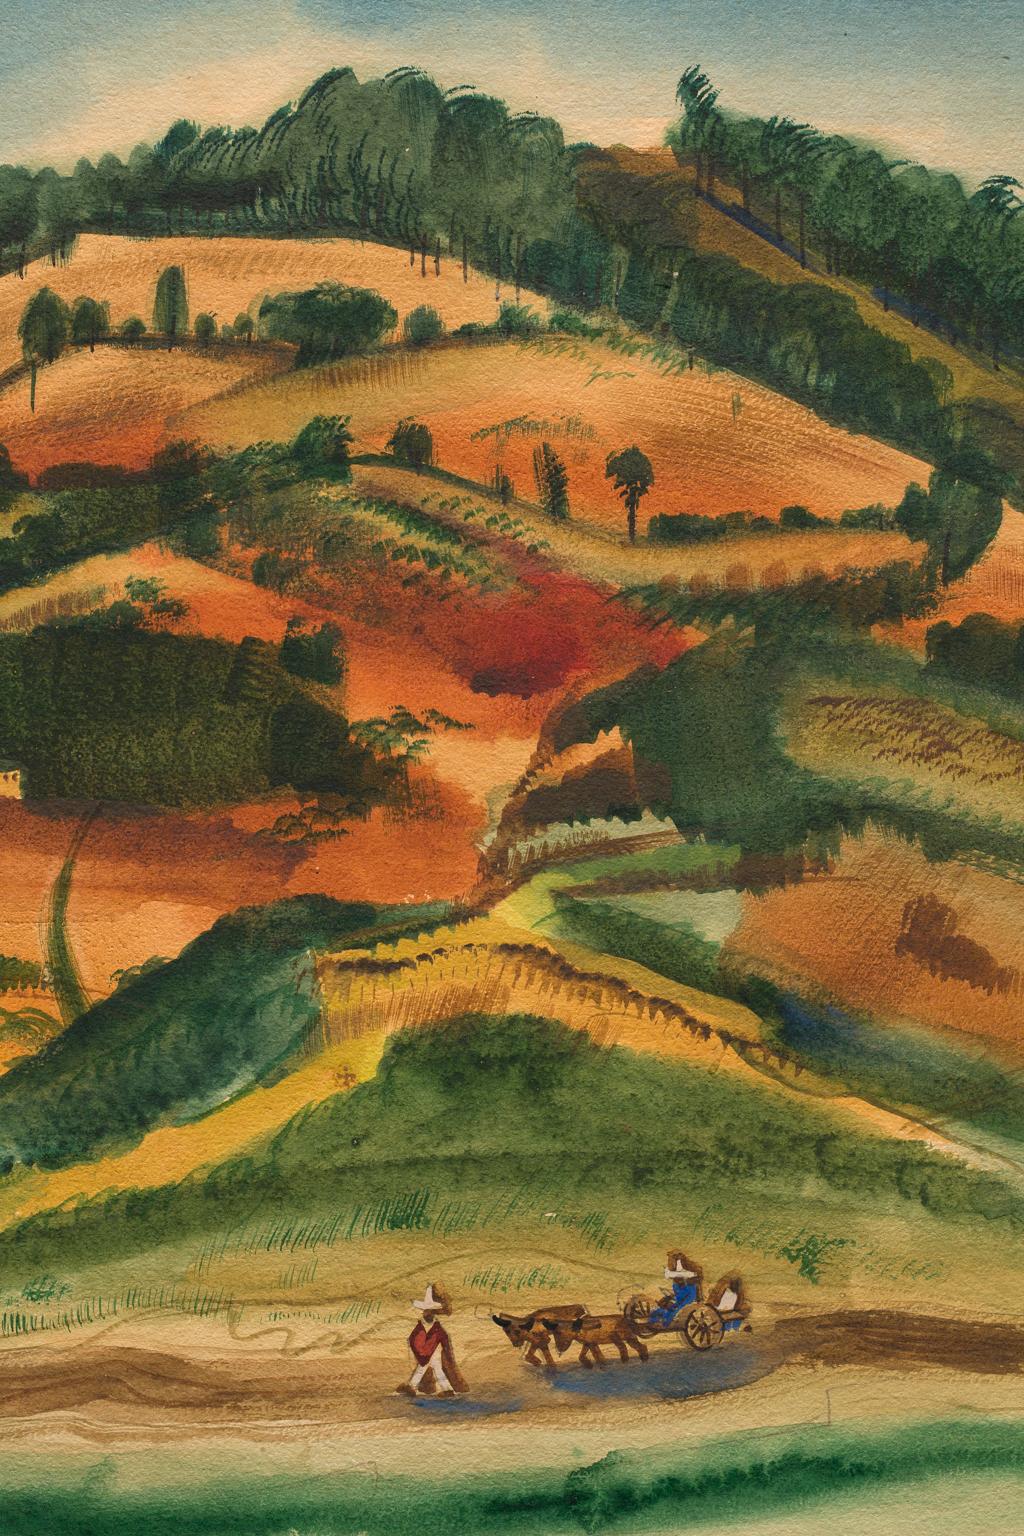 The idyllic atmosphere of this Mexican scene is located in Mexico, west of Mexico City and south of Guadalajara. “Red Hills Near Patzcuaro” is set in a golden light. and was one of three paintings by the artist while the artist visited Patzcuaro,